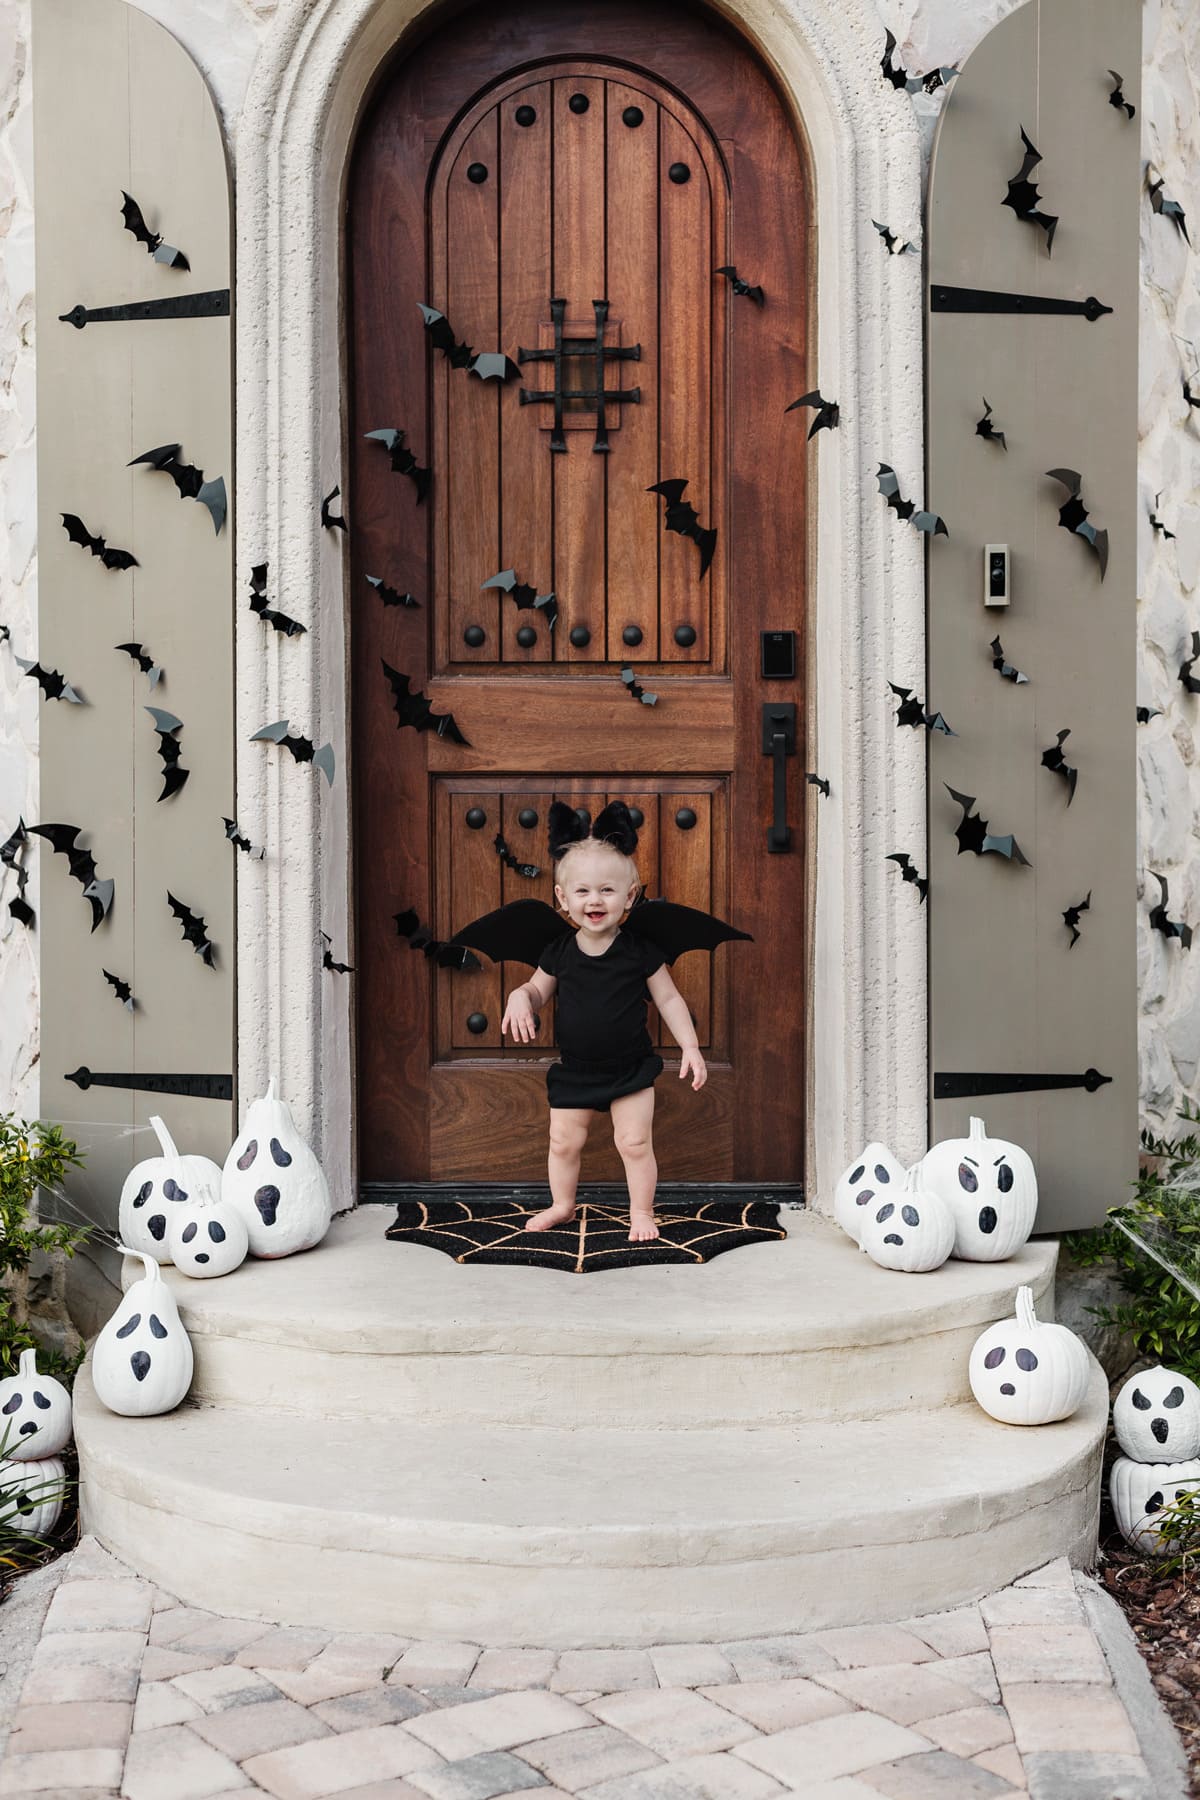 halloween front porch with bats, painted ghost pumpkins and baby dressed as bat